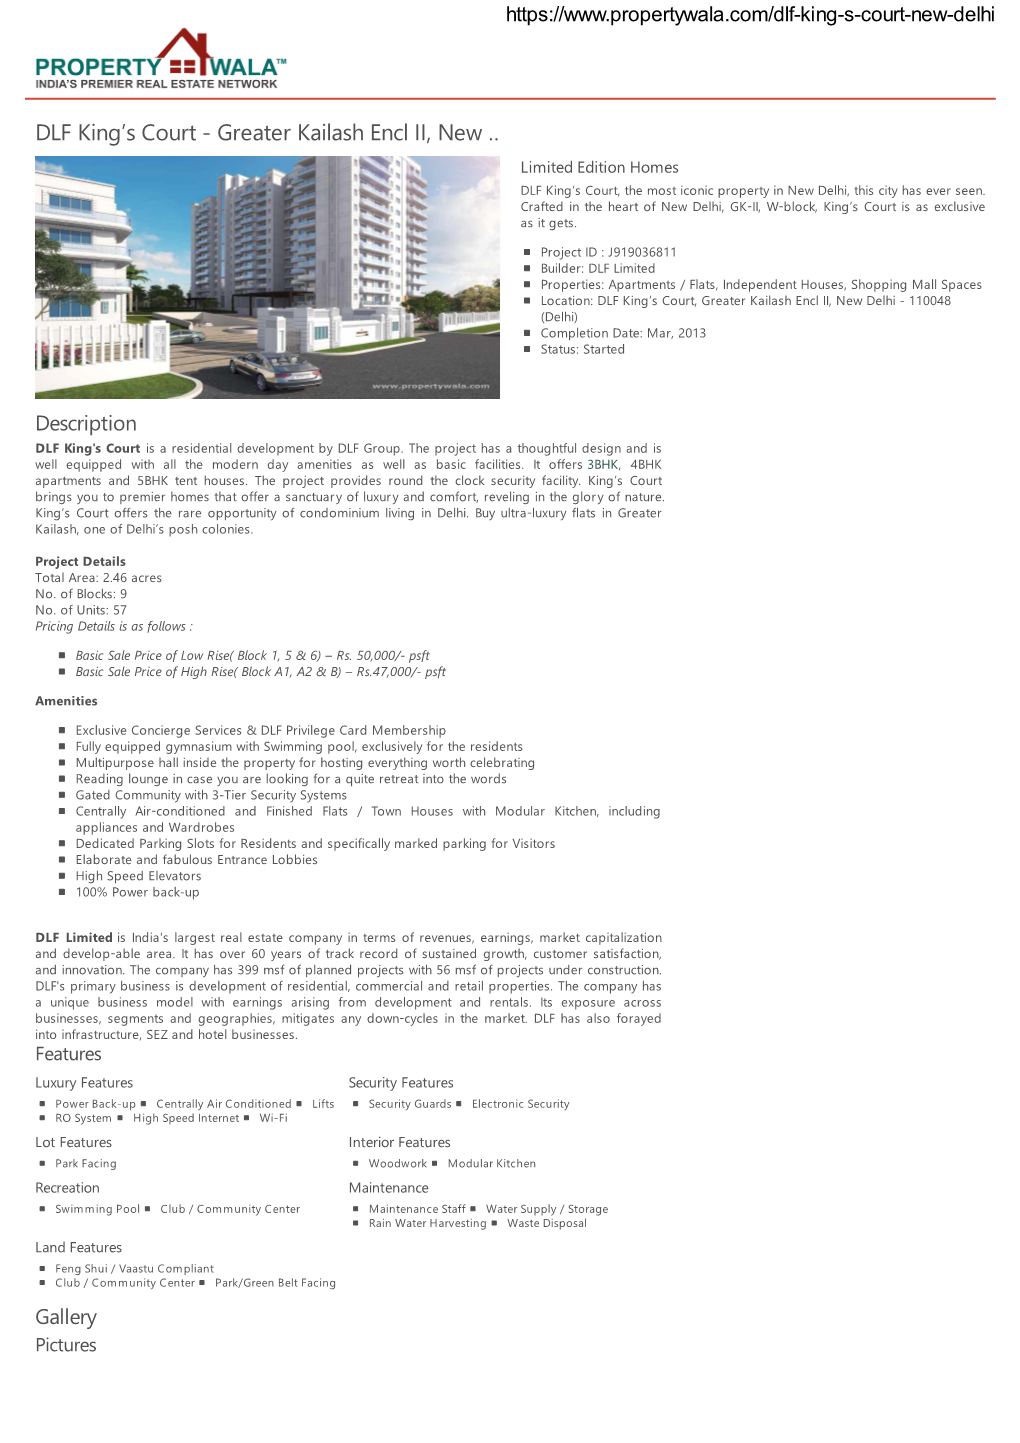 DLF King's Court Is a Residential Development by DLF Group